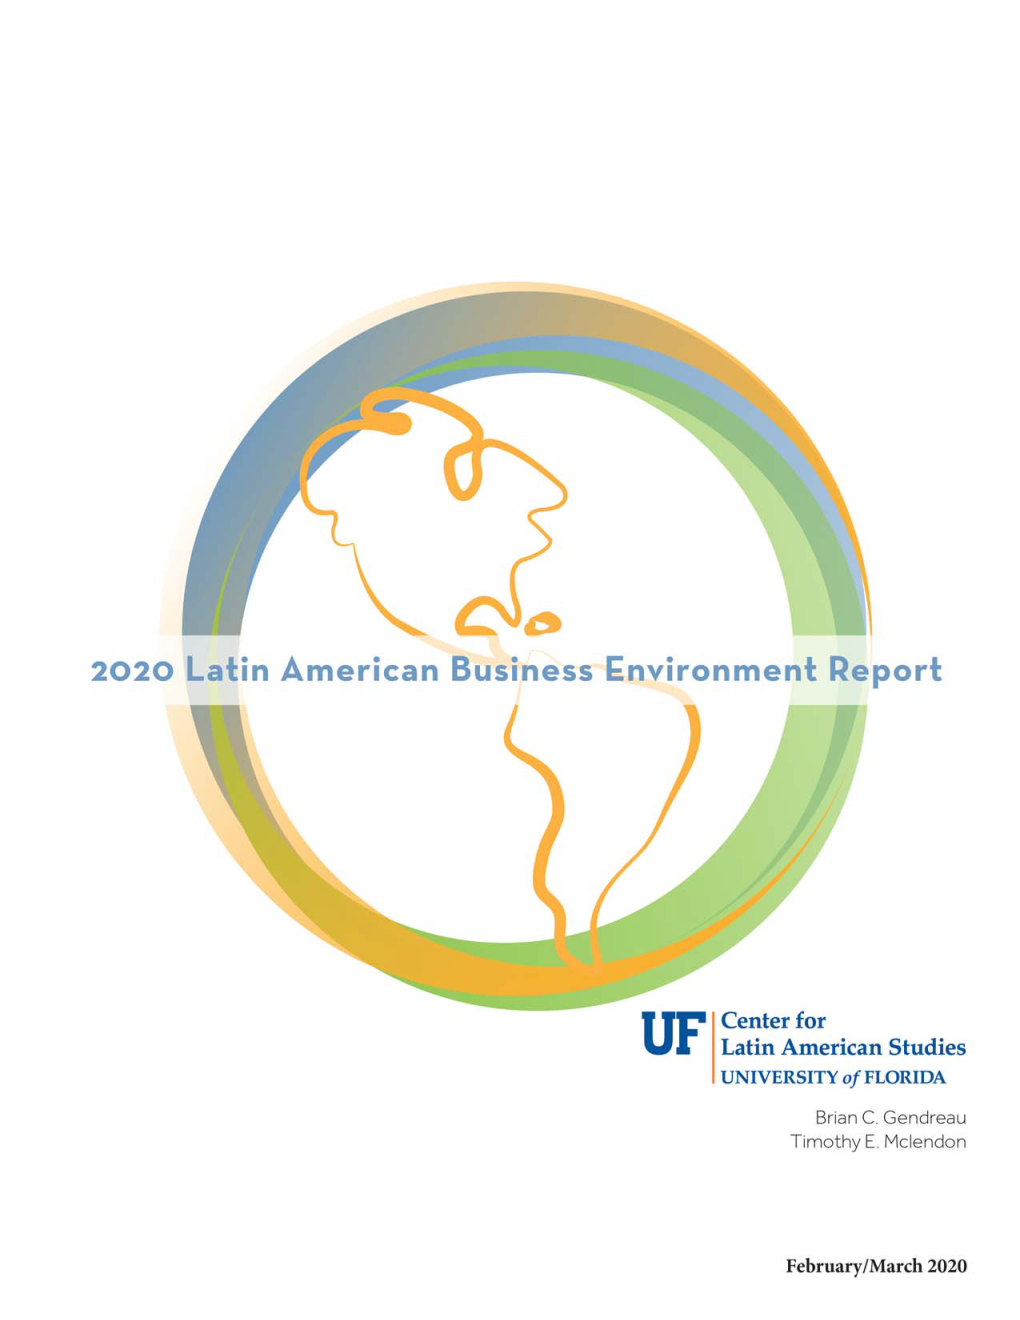 2020 LATIN AMERICAN BUSINESS ENVIRONMENT REPORT Brian Gendreau and Timothy E